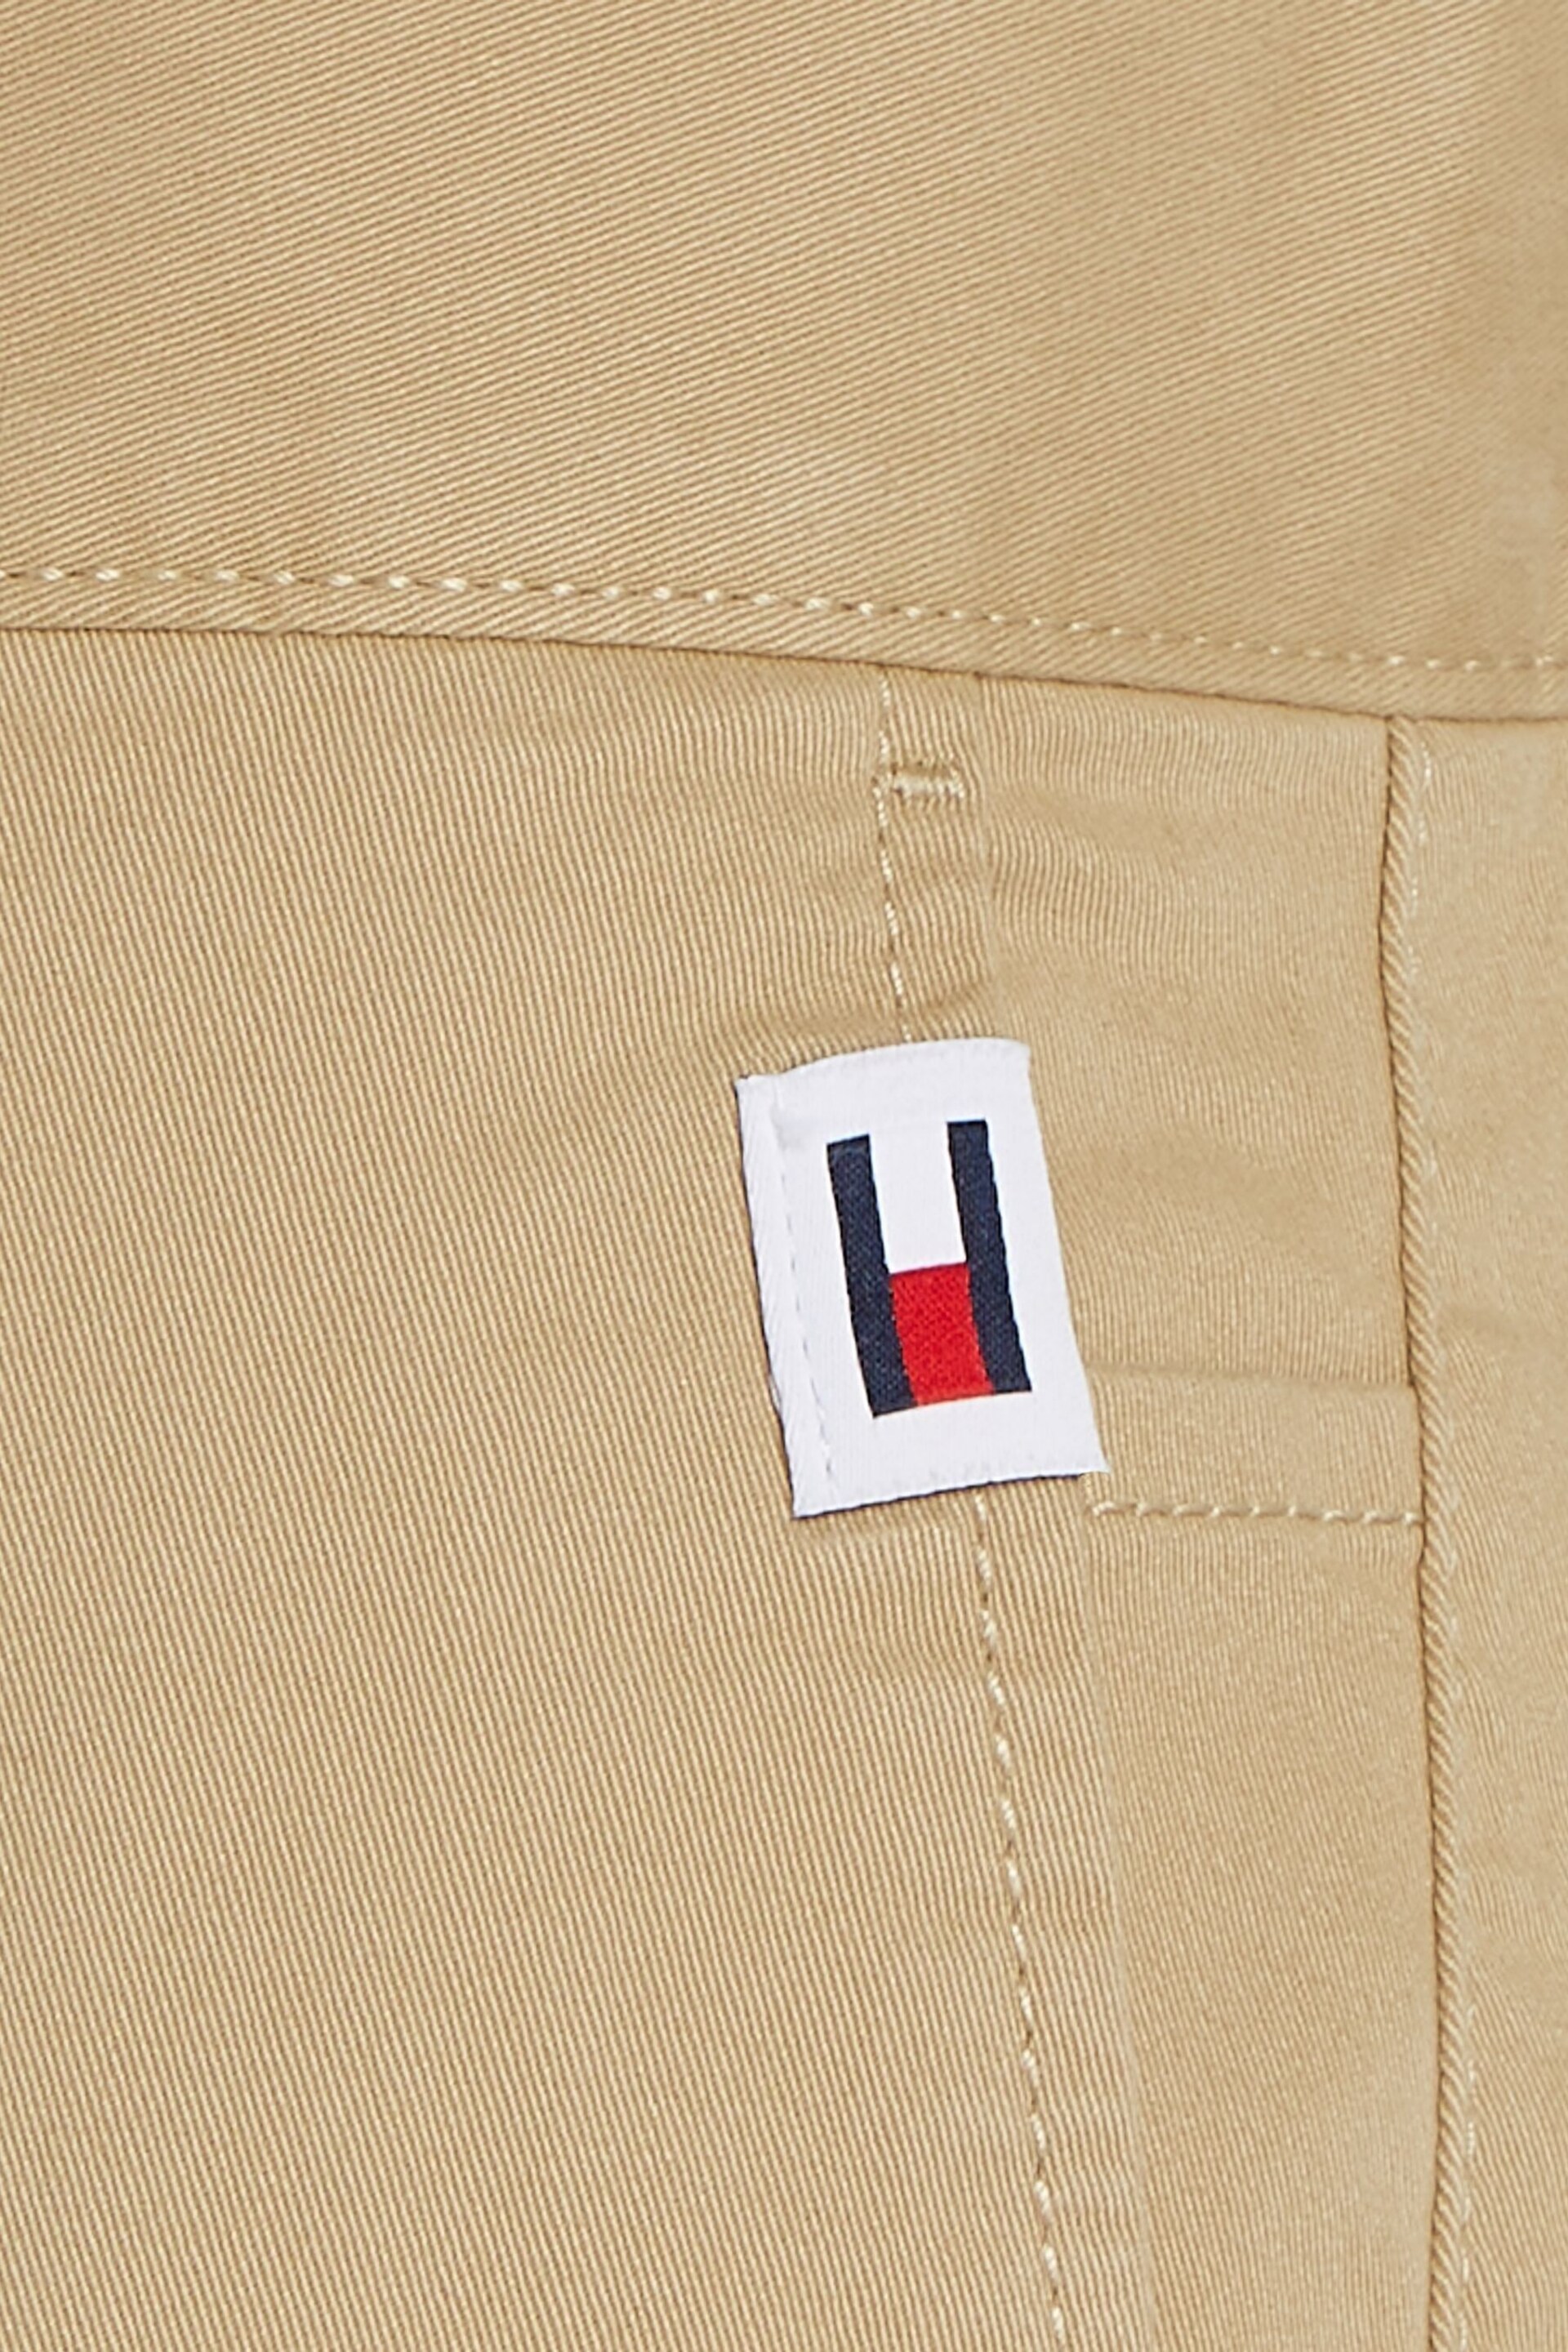 Tommy Jeans Cream Scanton Shorts - Image 6 of 6